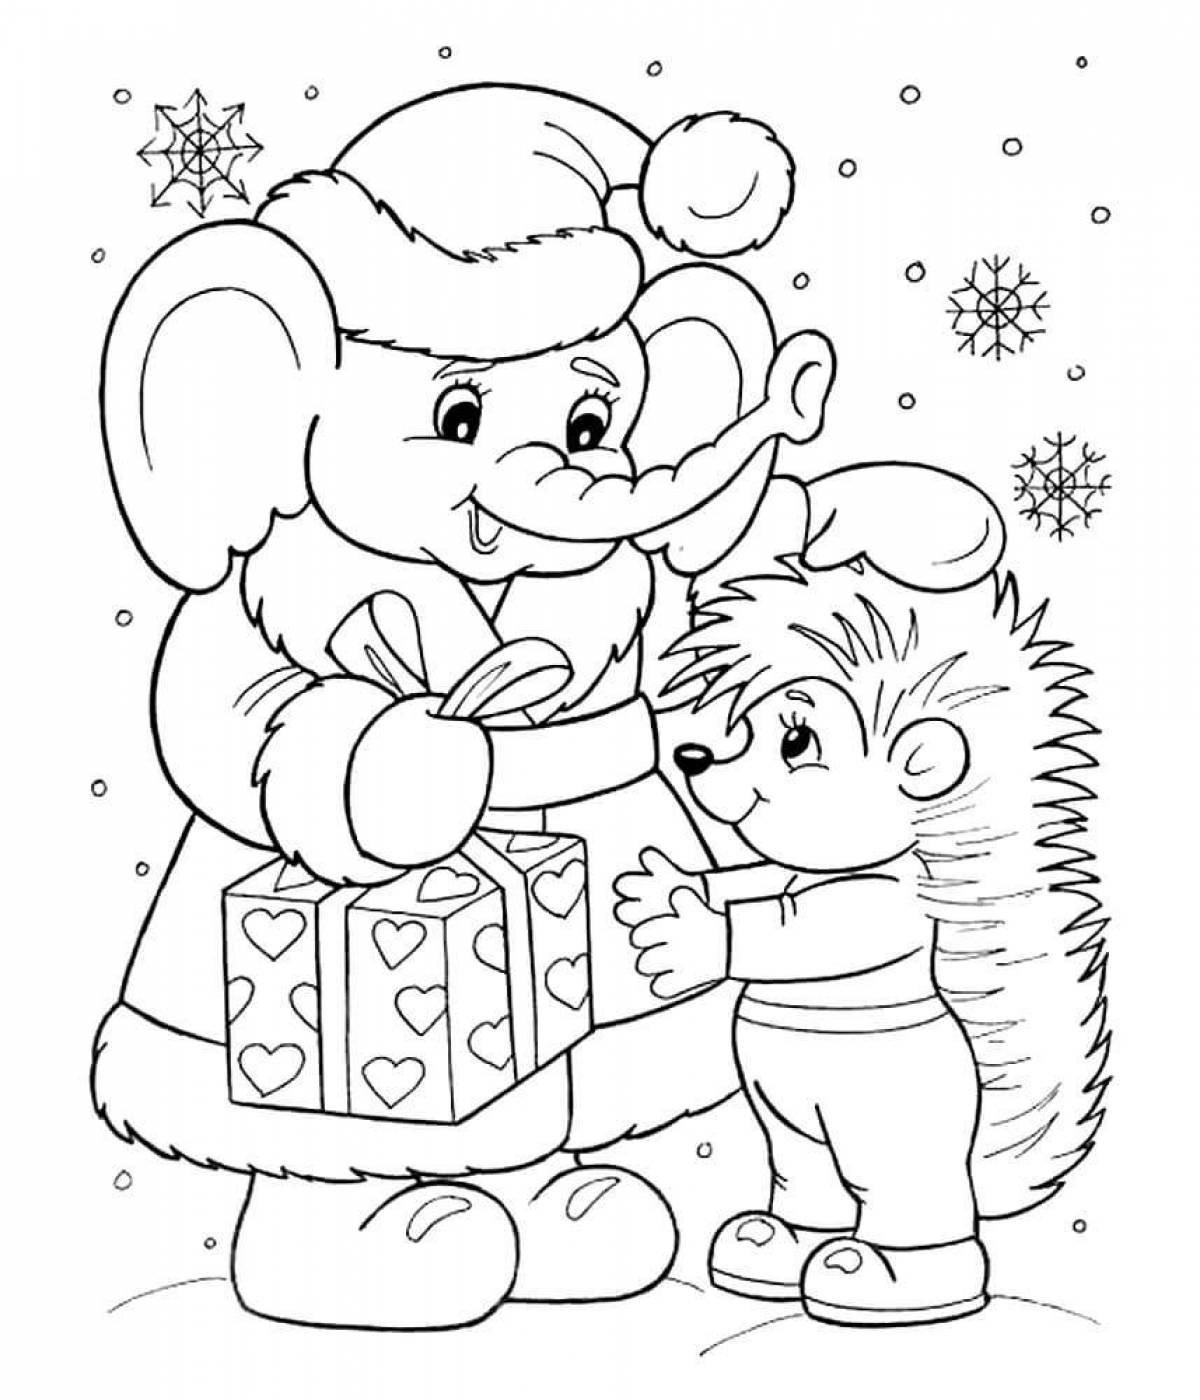 Color explosion children's Christmas coloring book